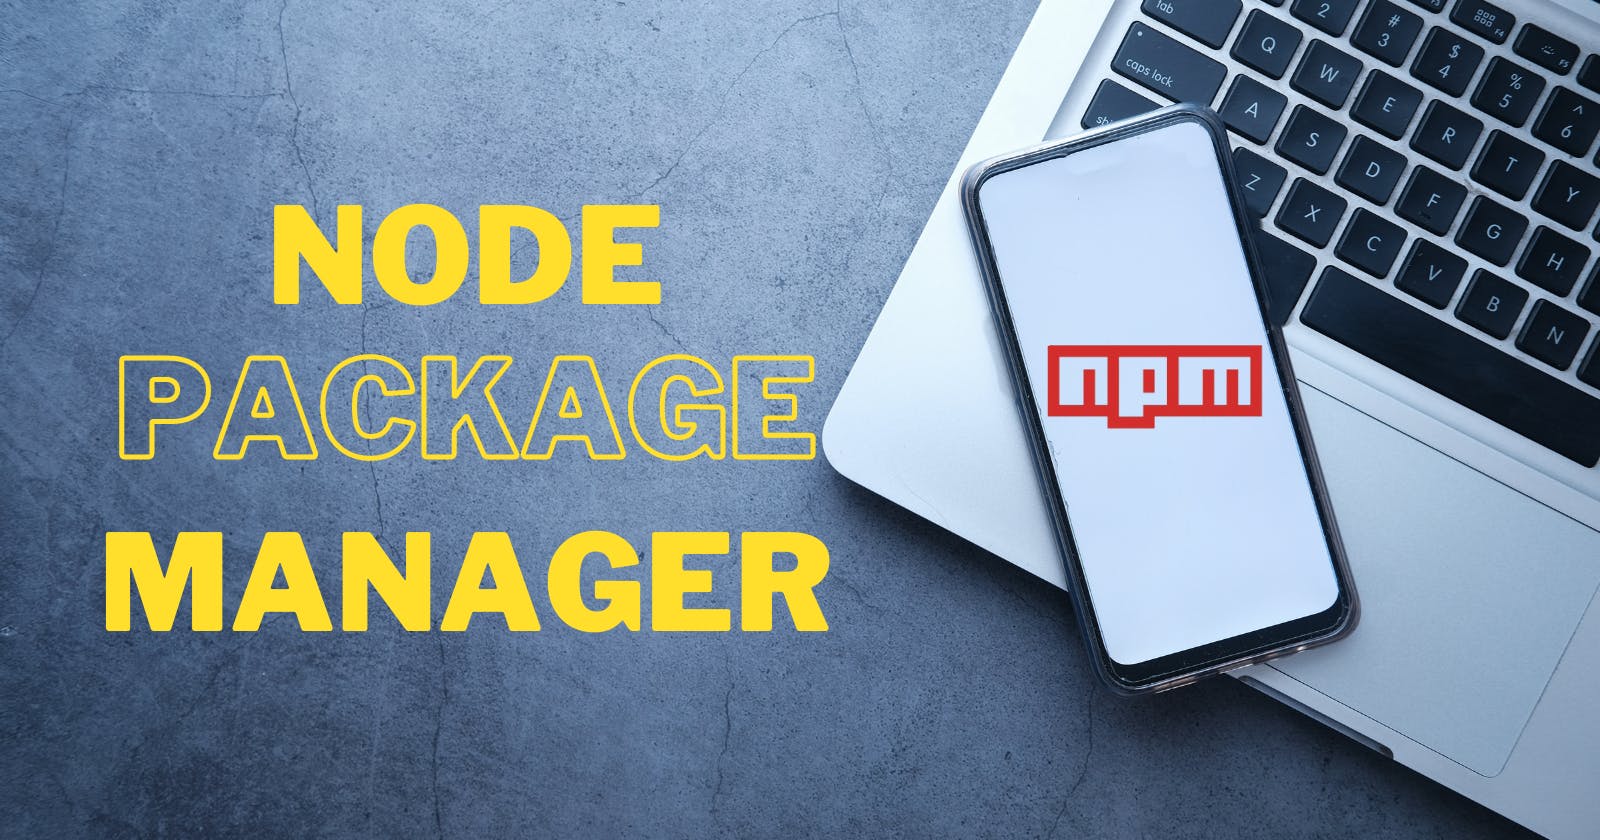 Deep Dive into npm: Node Package Manager